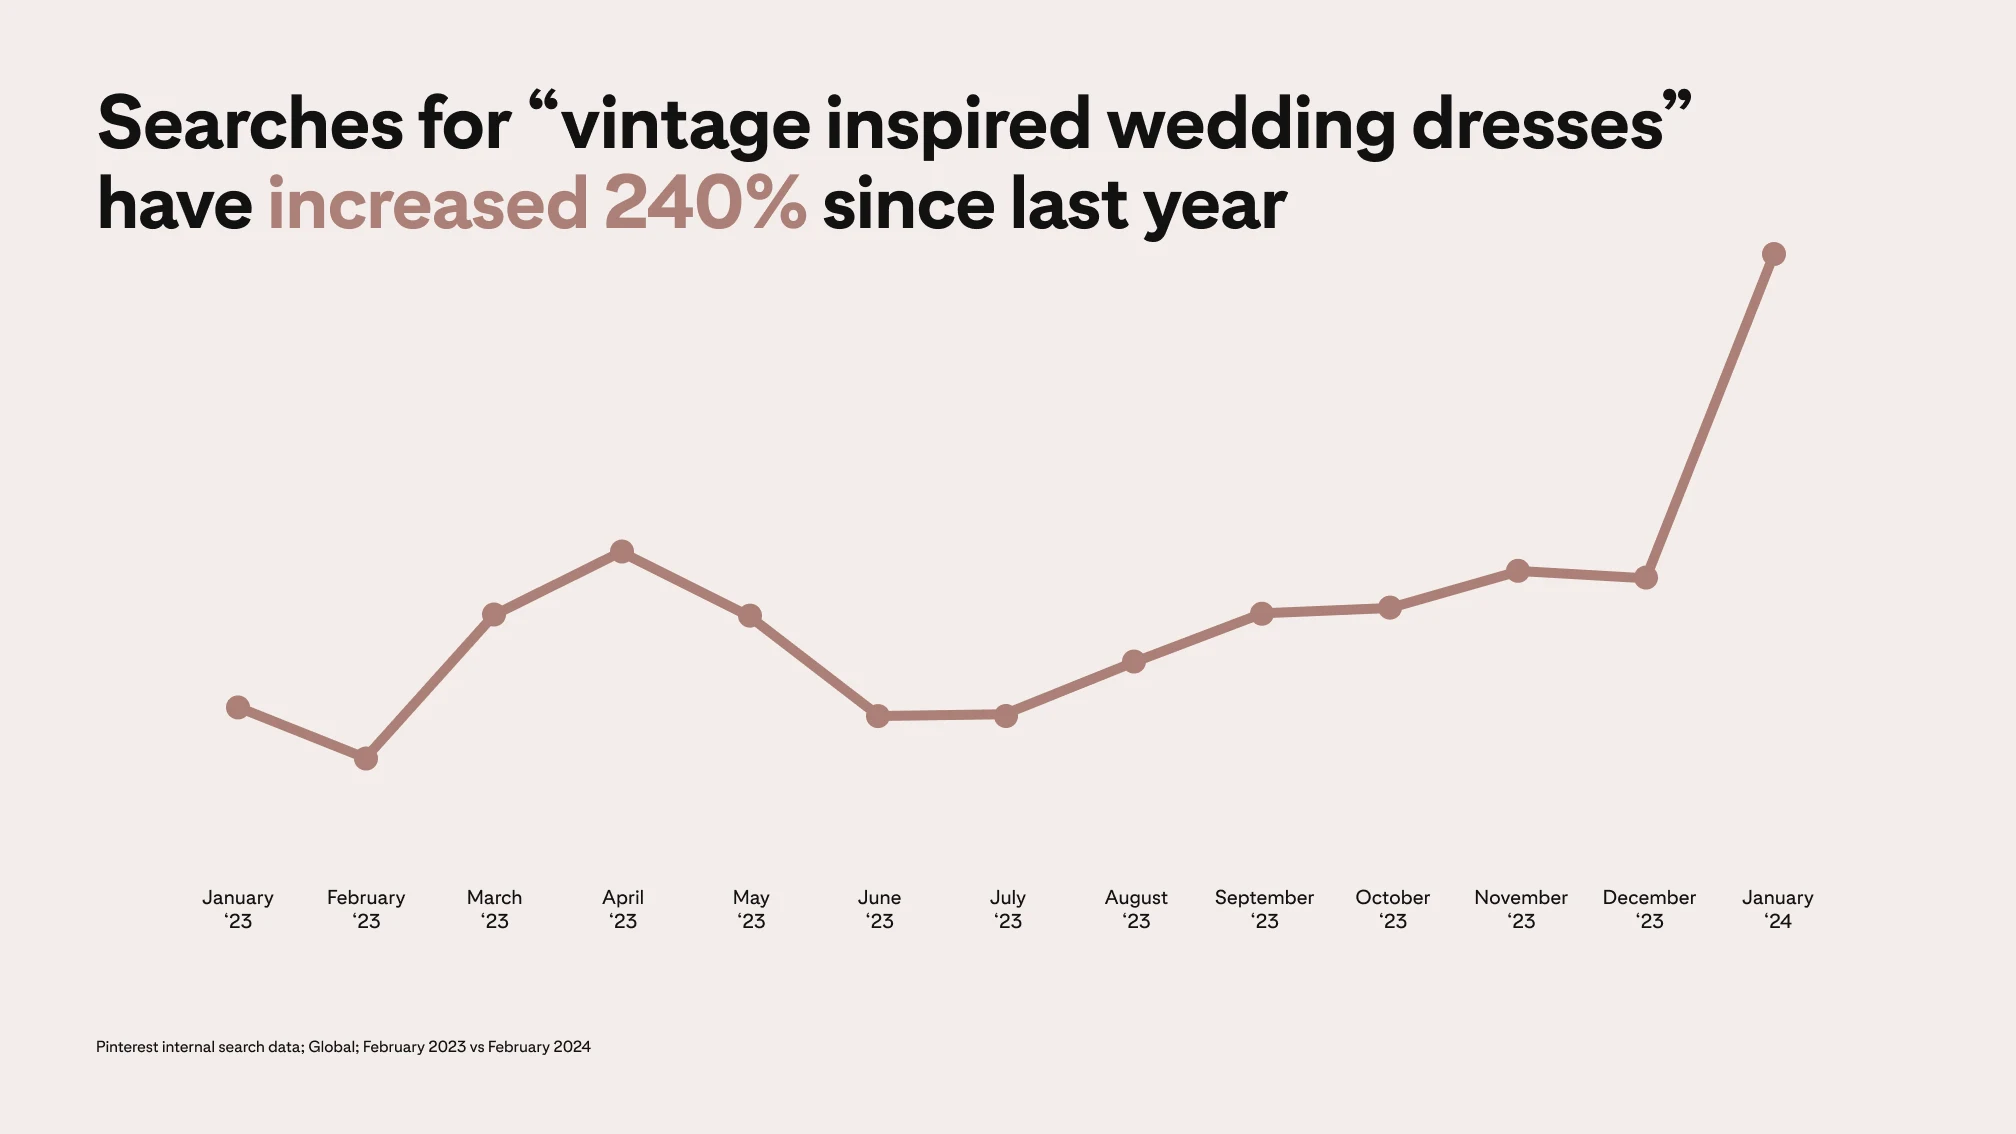 A line graph shows that Pinterest searches for "vintage inspired wedding dresses" have increased 240% since last year